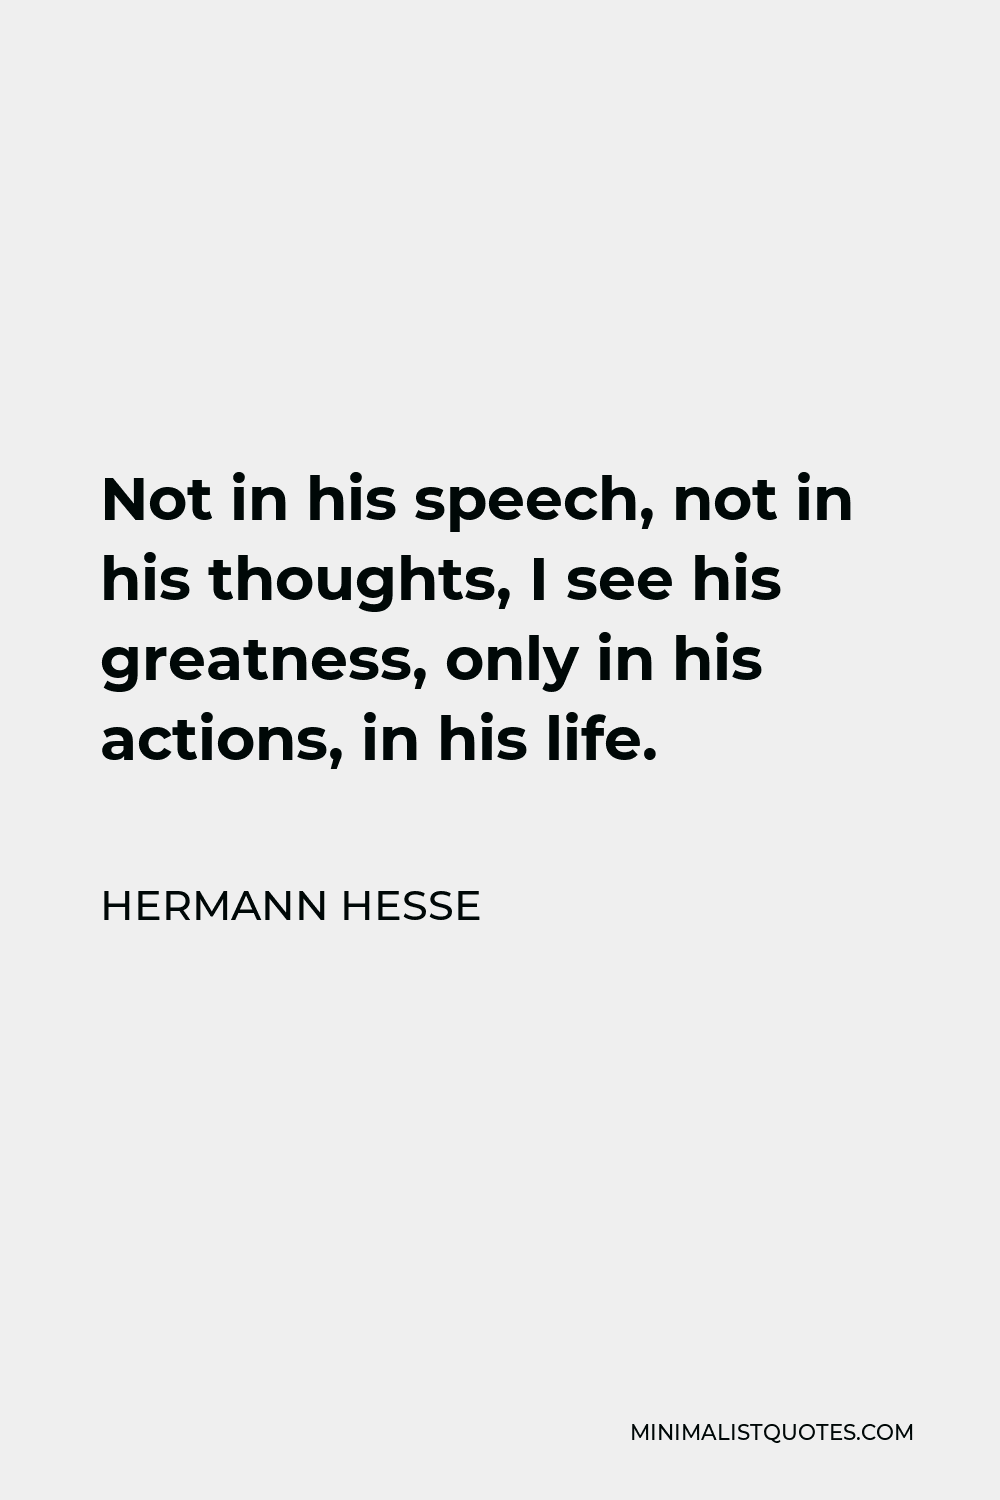 Hermann Hesse Quote - Not in his speech, not in his thoughts, I see his greatness, only in his actions, in his life.